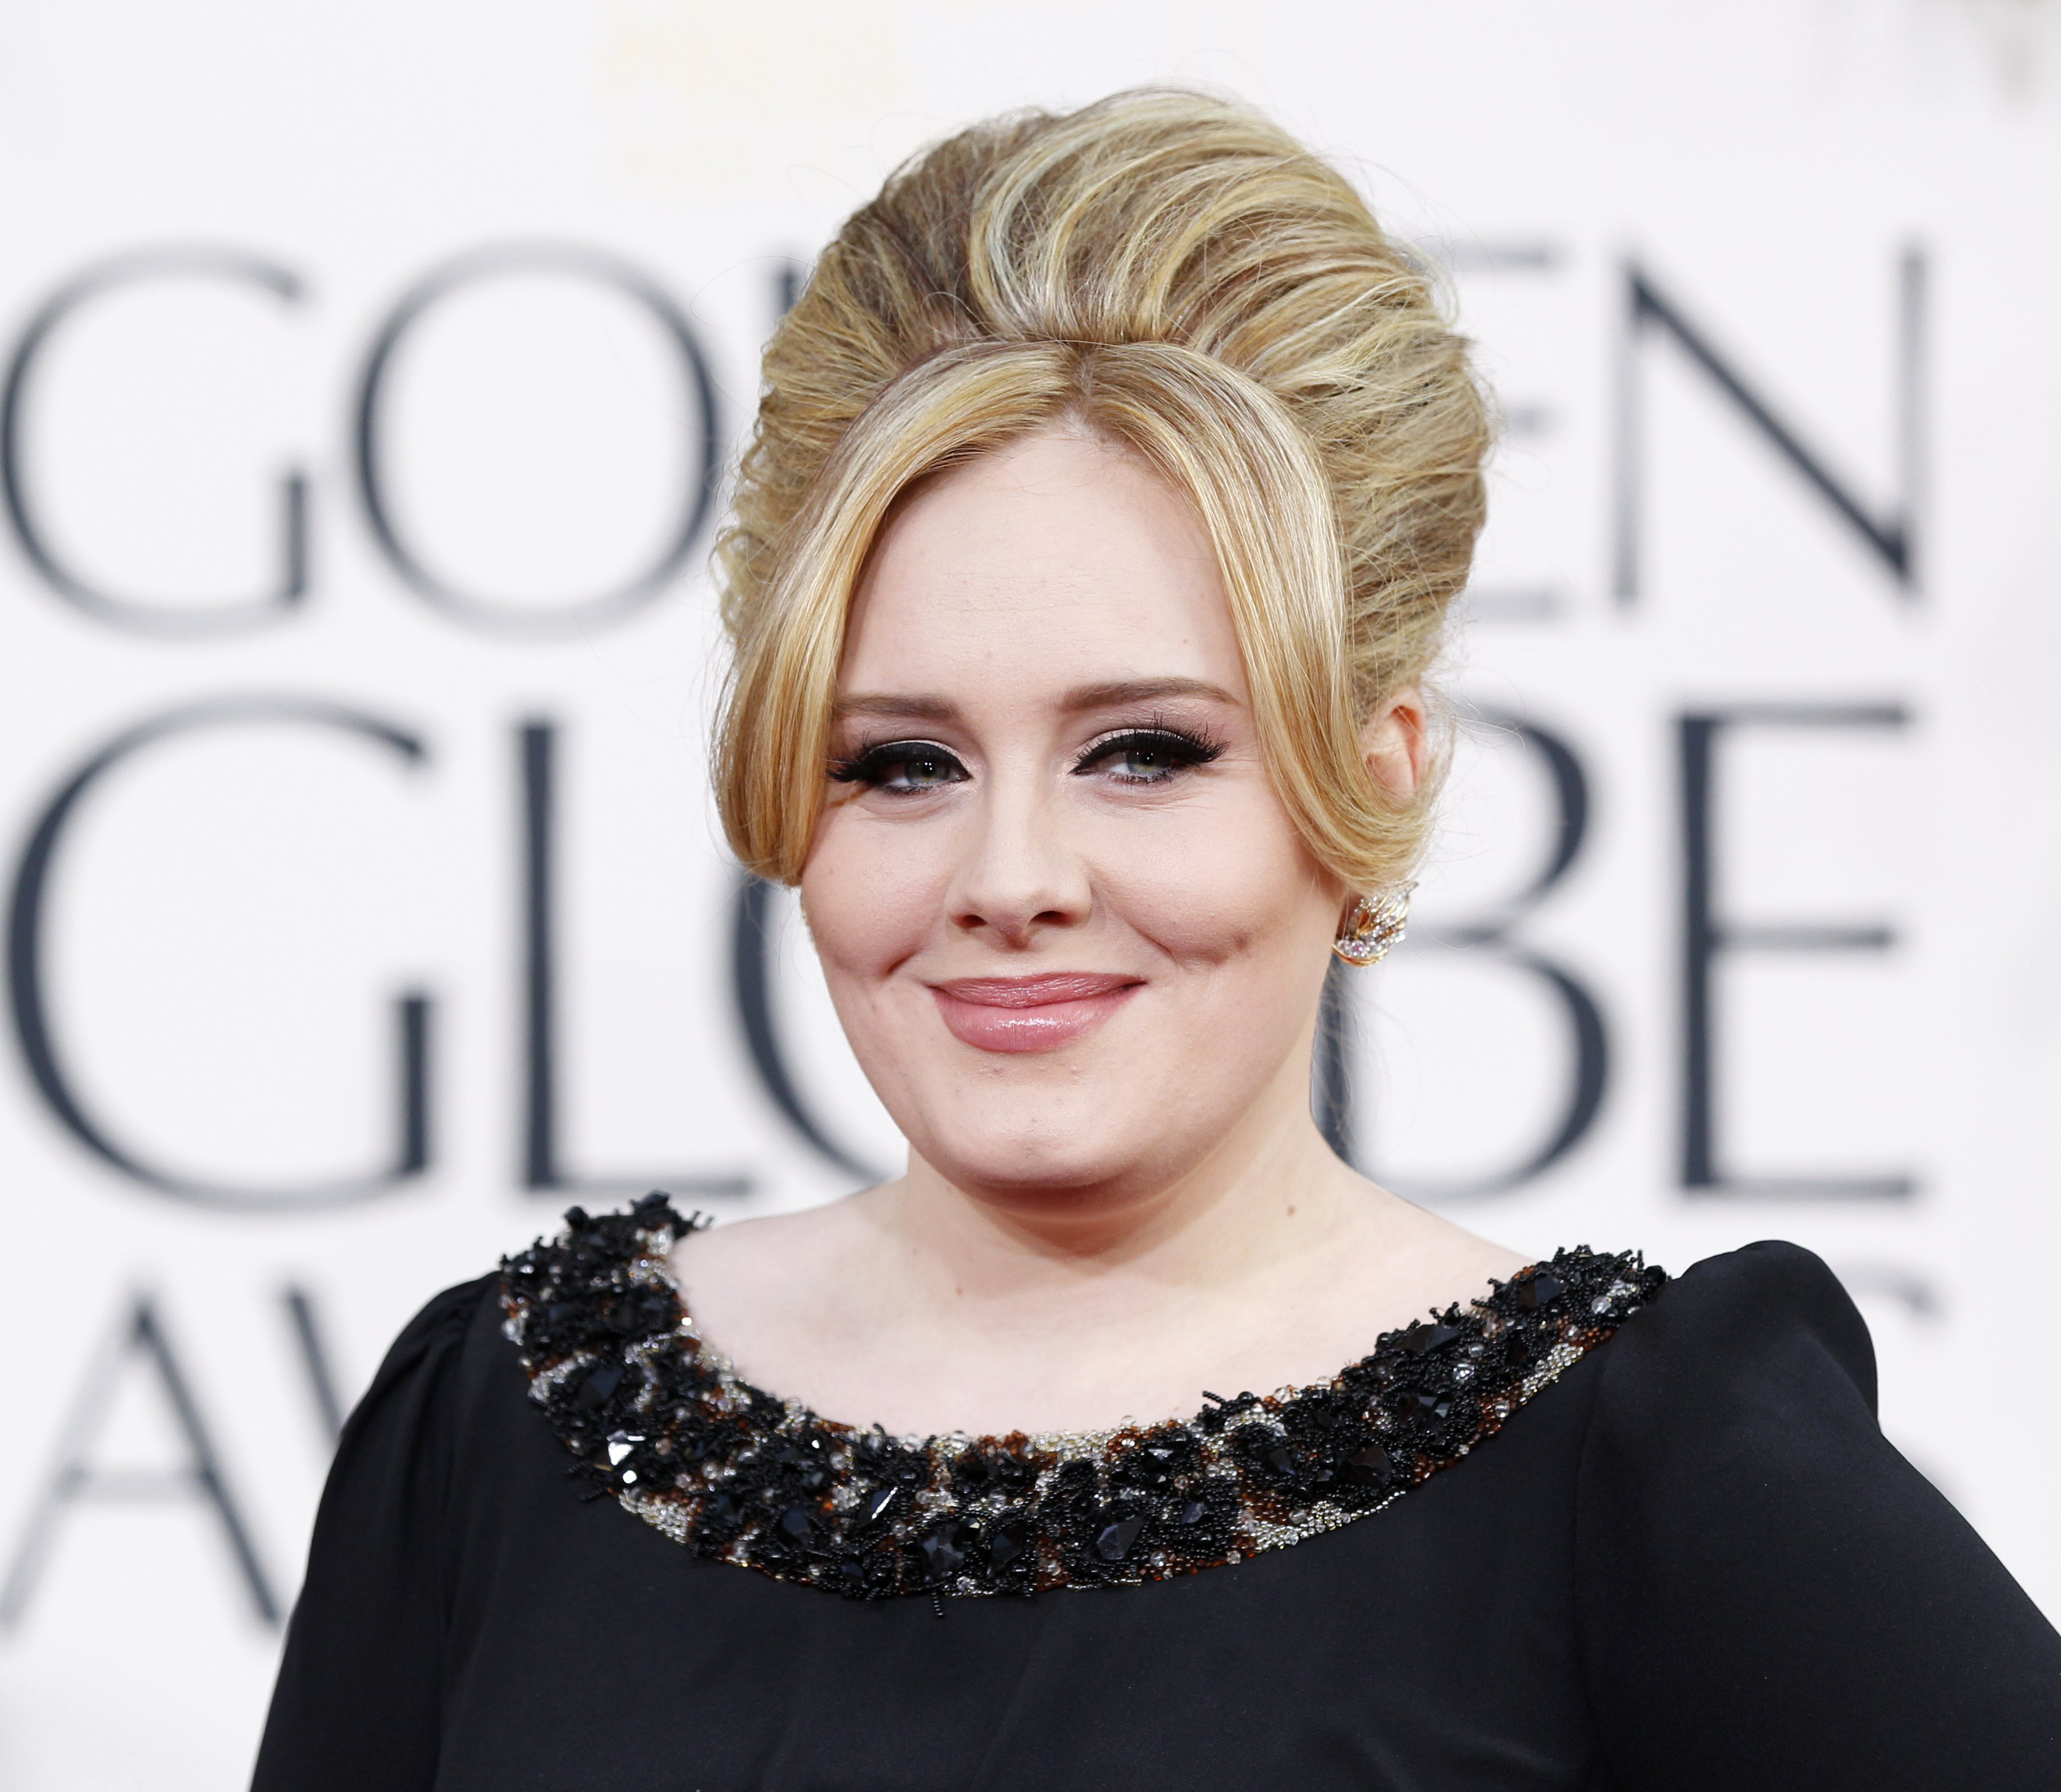 Adele News: Singer Becomes New Beckham Neighbor, Gets Honored By Queen ...